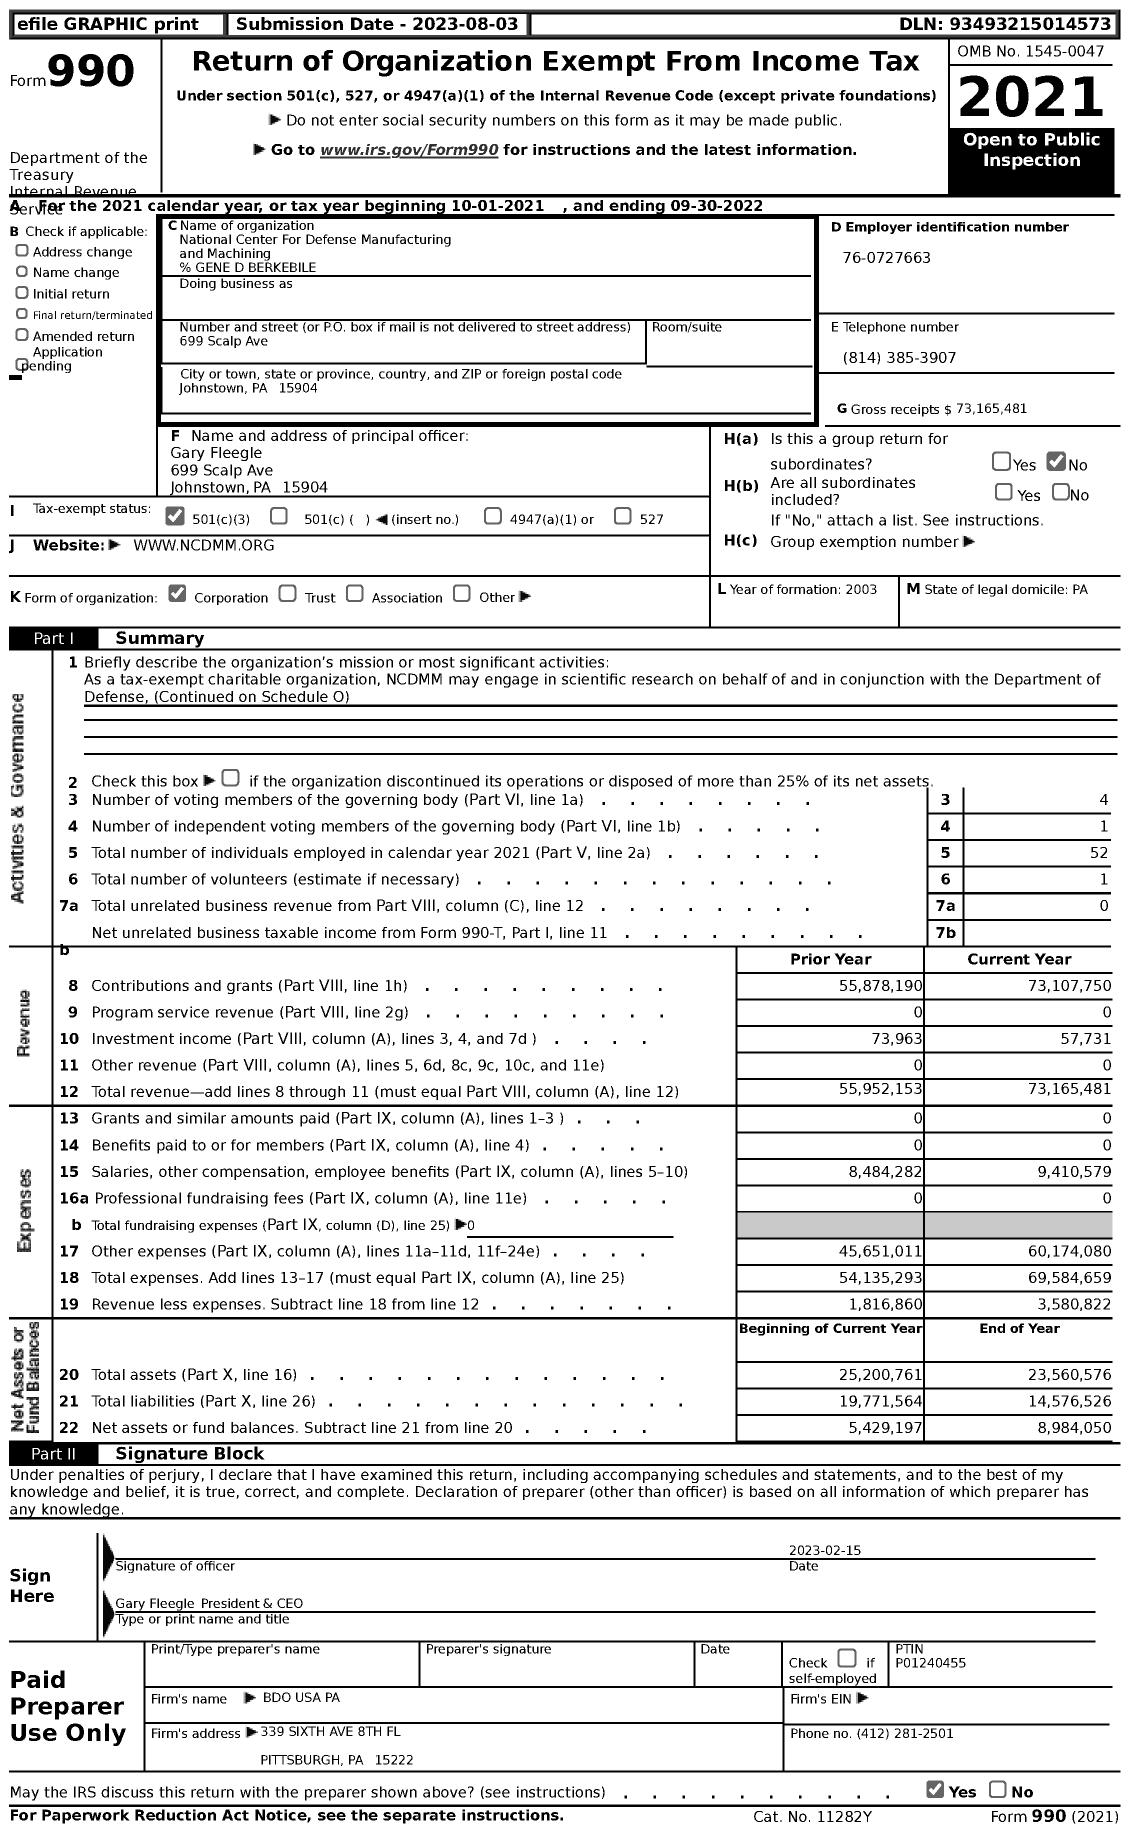 Image of first page of 2021 Form 990 for National Center for Defense Manufacturing and Machining (NCDMM)